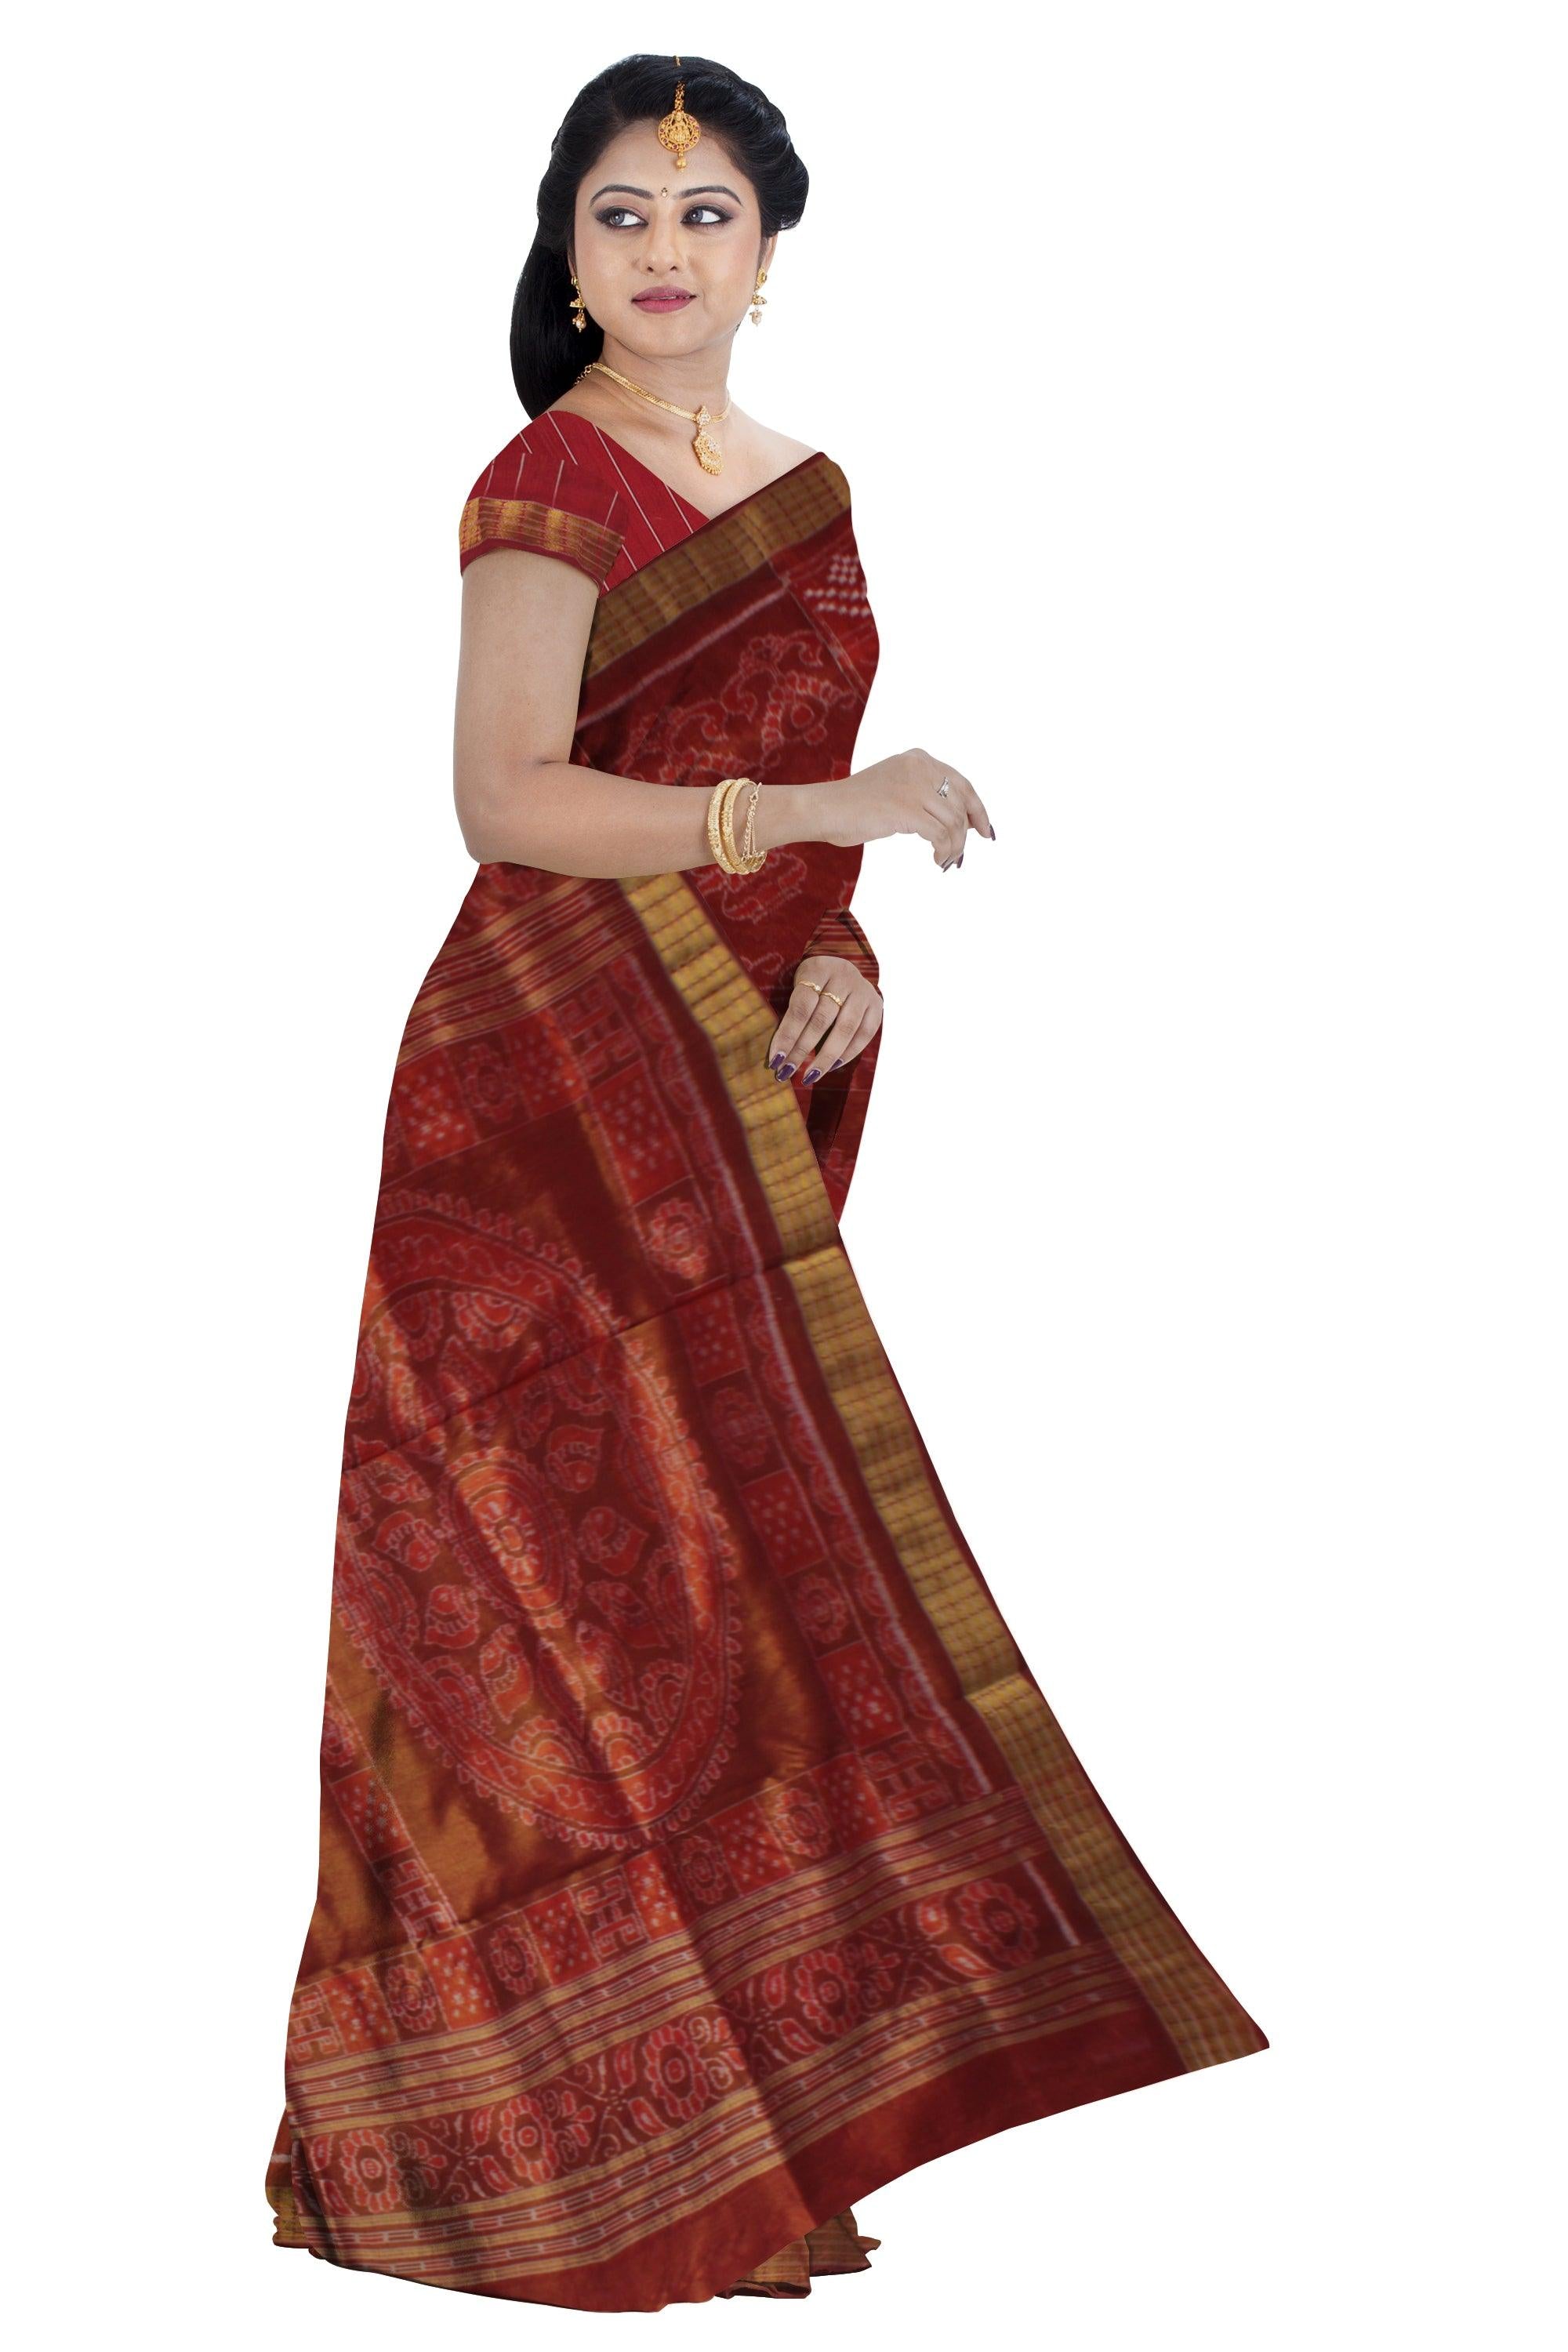 TRADITIONAL KALASH AND PASAPALI PATTERN PURE TISSUE SILK SAREE IS DARK-ORANGE AND MAROON COLOR BASE,AVAILABLE WITH MATCHING BLOUSE PIECE. - Koshali Arts & Crafts Enterprise